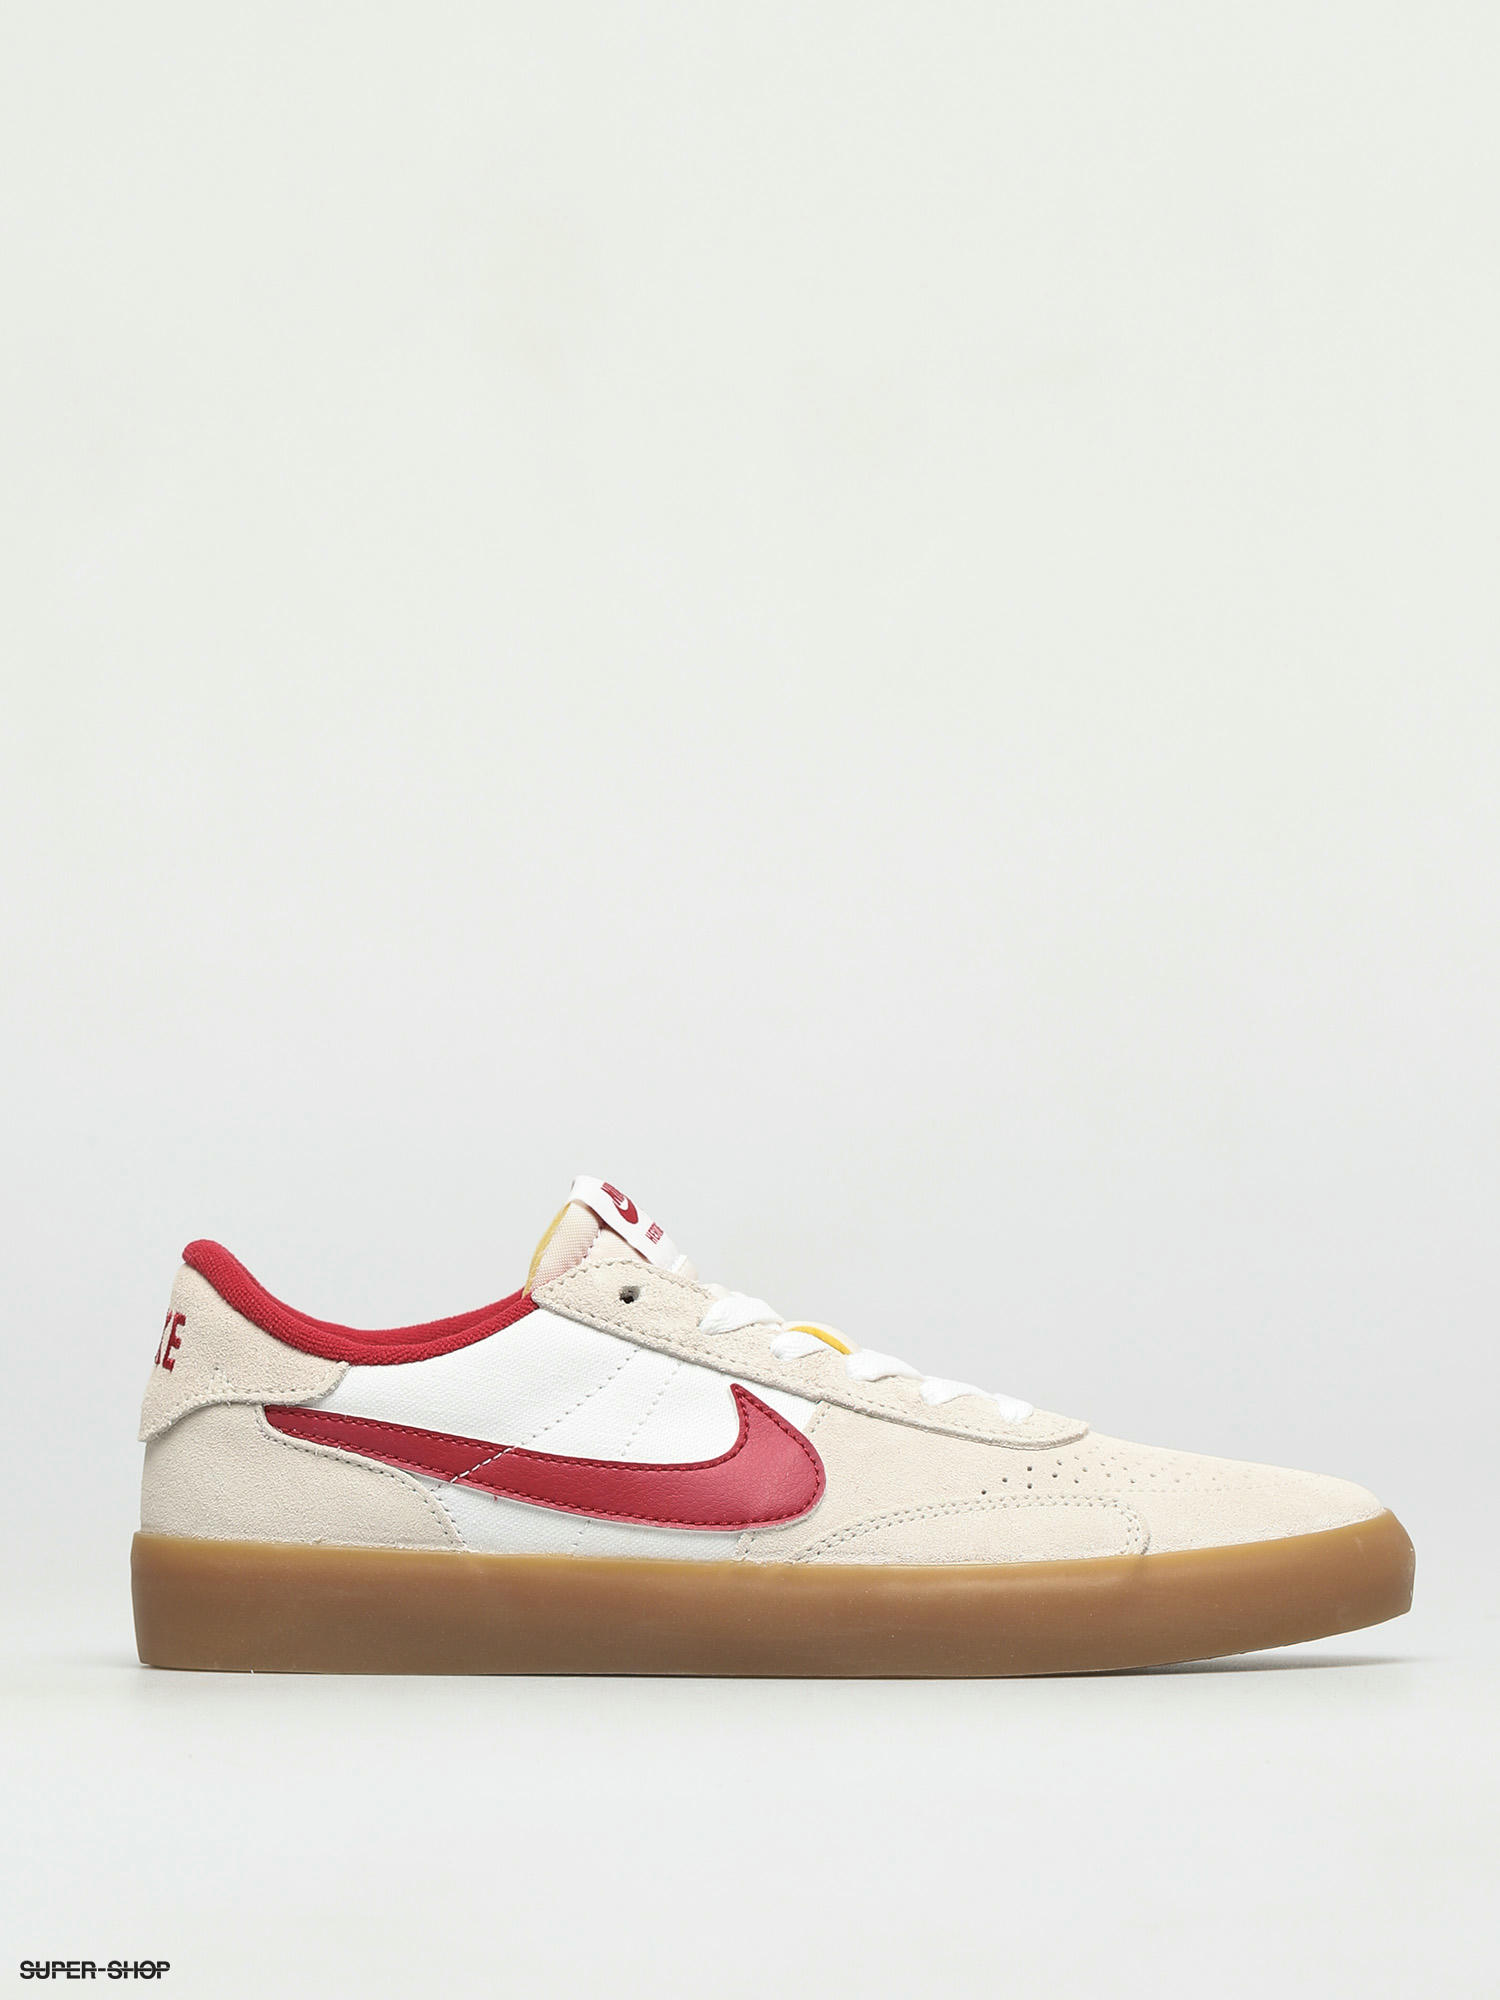 nike sb shoes red and white